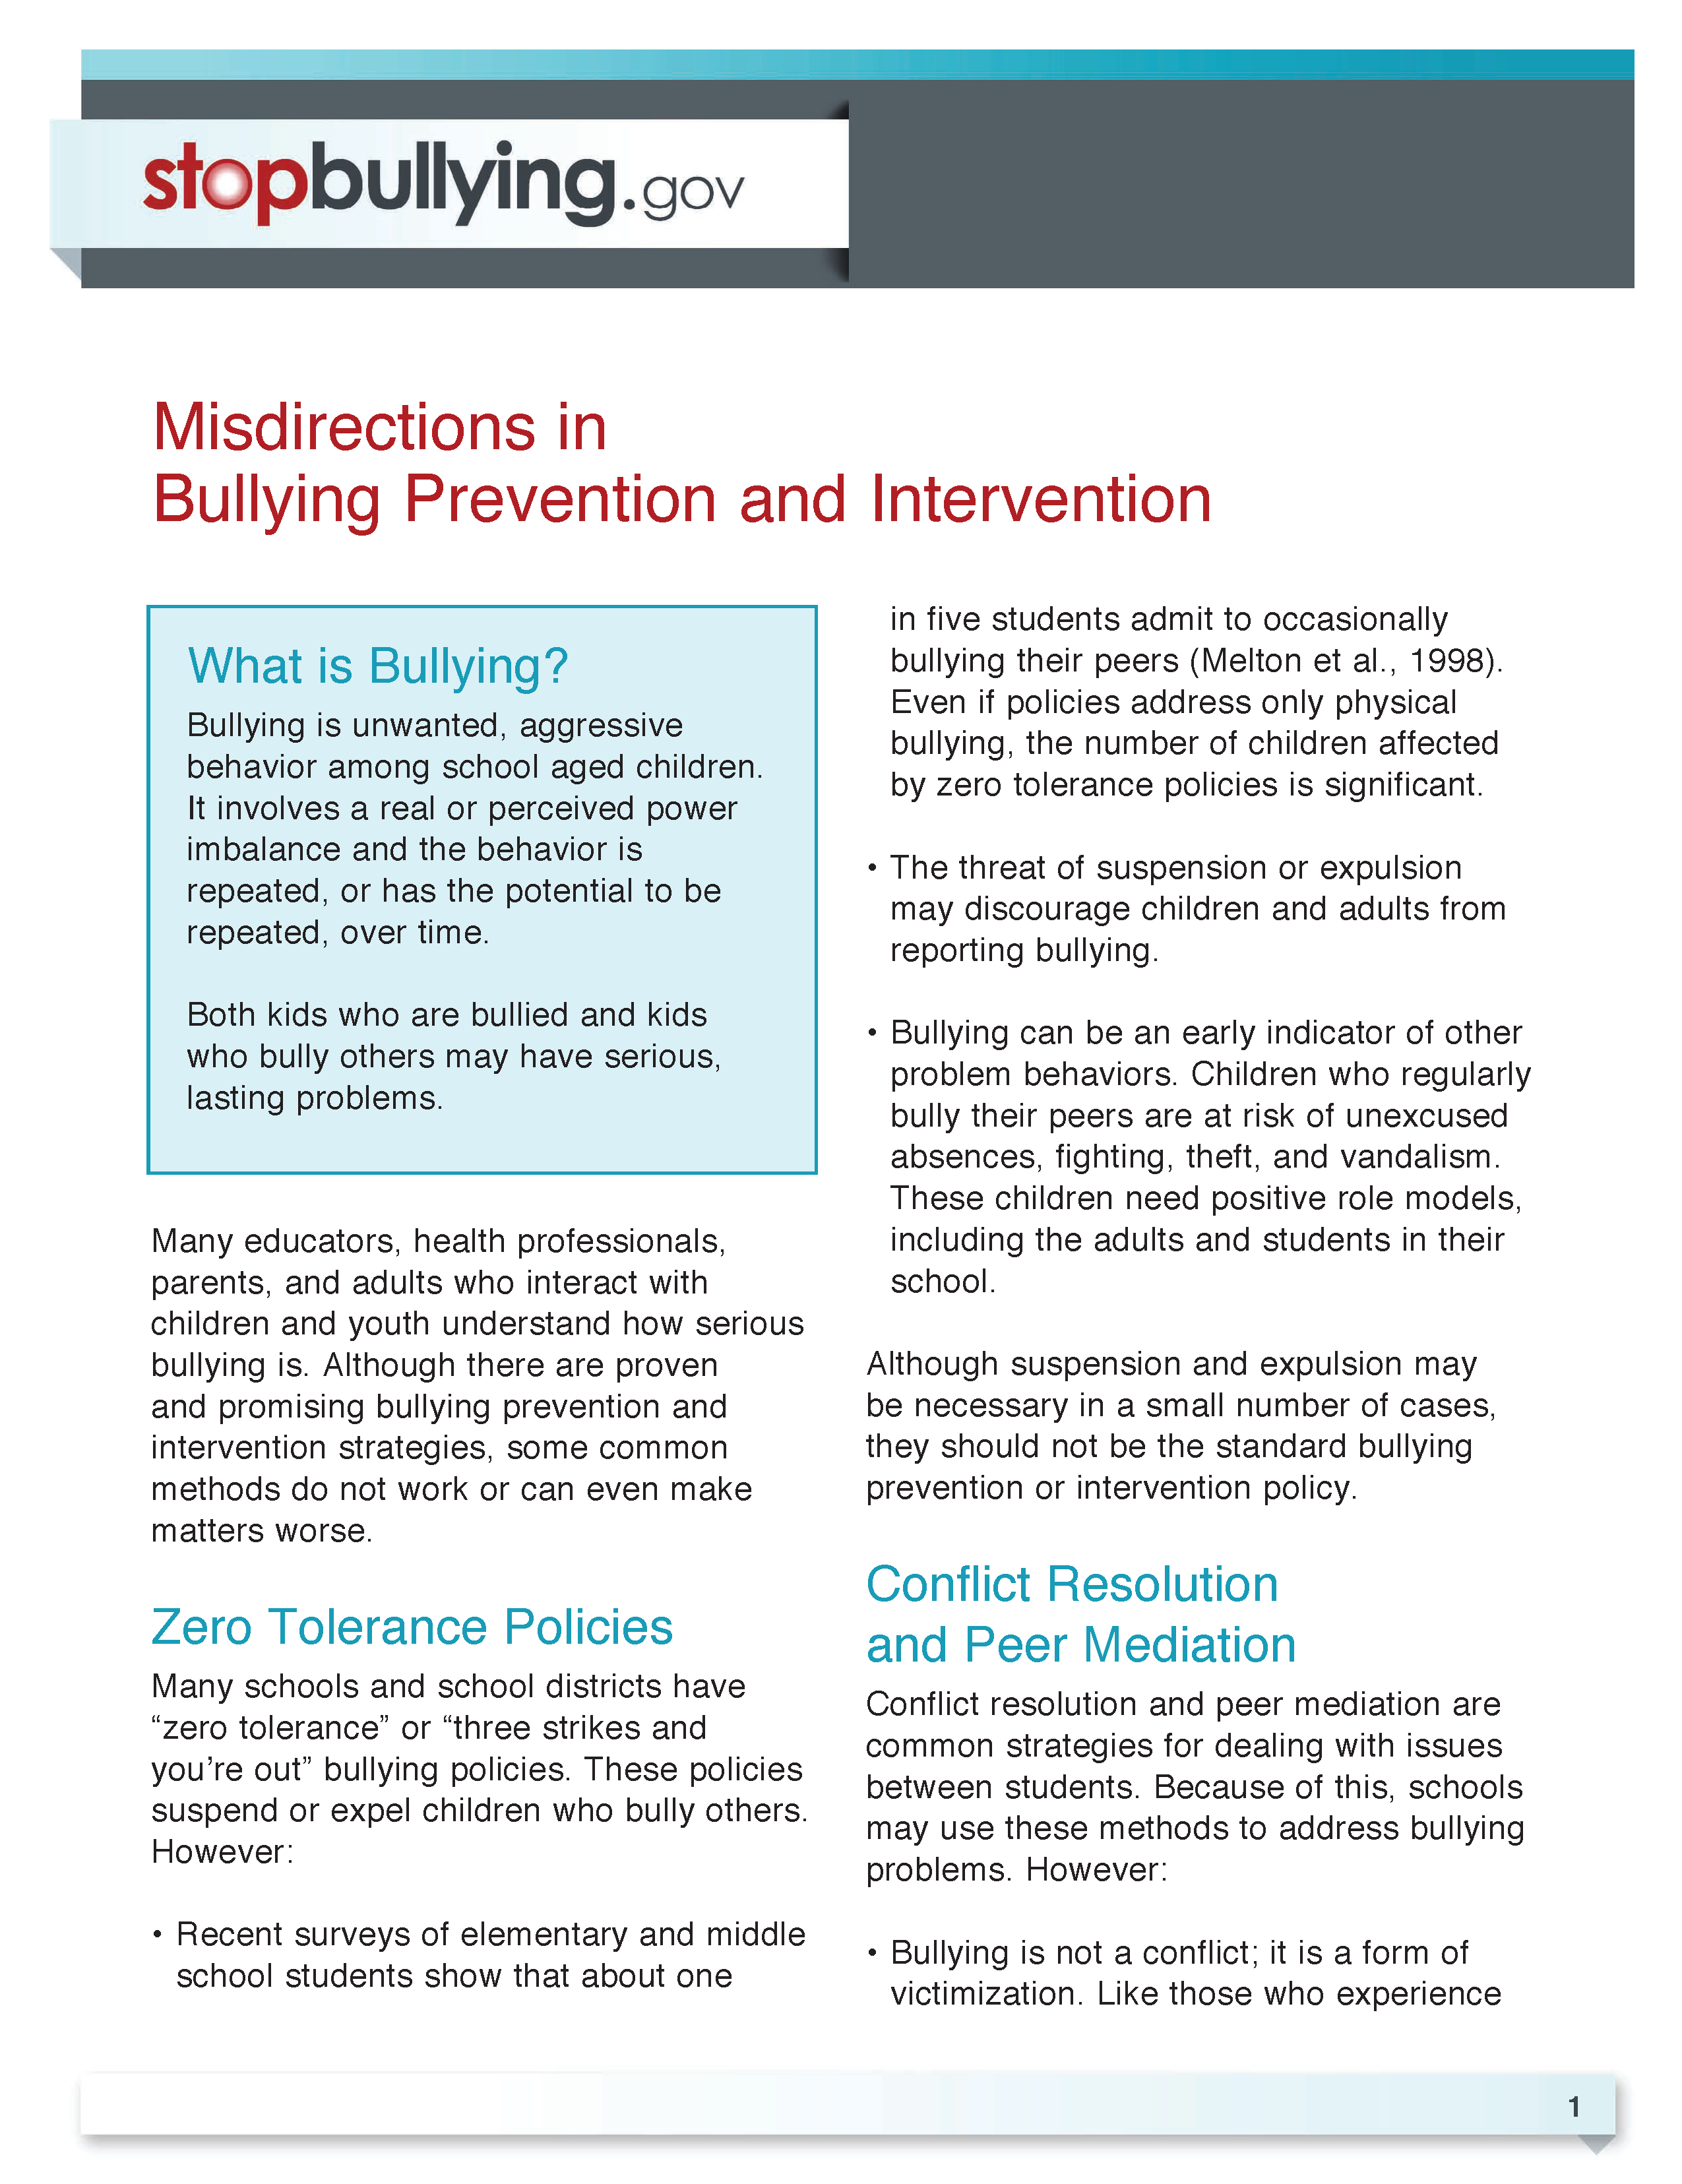 Misdirections in Bullying Prevention and Intervention